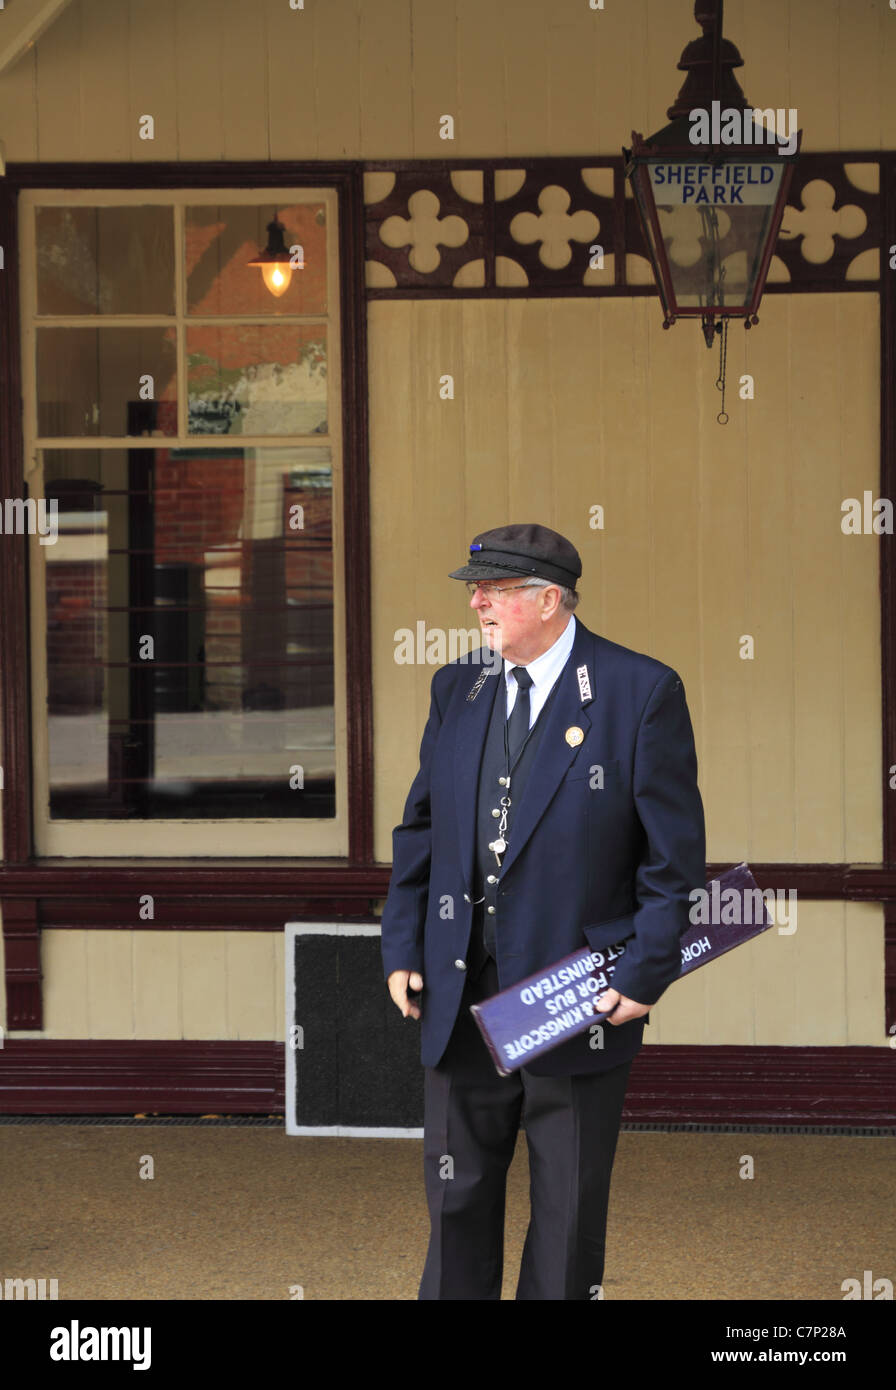 The station master waits on the platform at The Bluebell Line Steam Railway, Sheffield park, West Sussex, England. Stock Photo